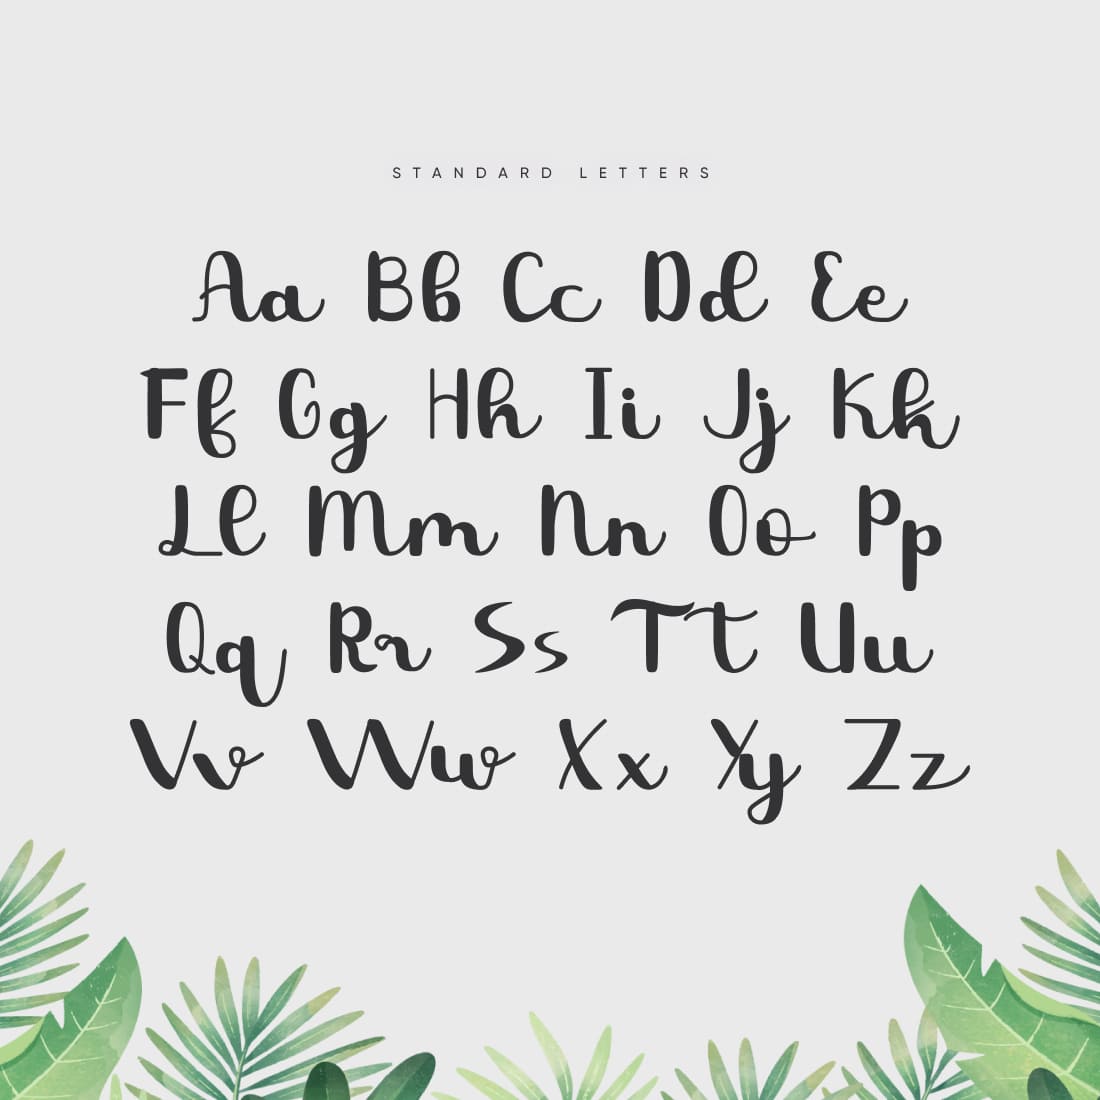 MasterBundles Free Tropical Font Cover with Standart Letters